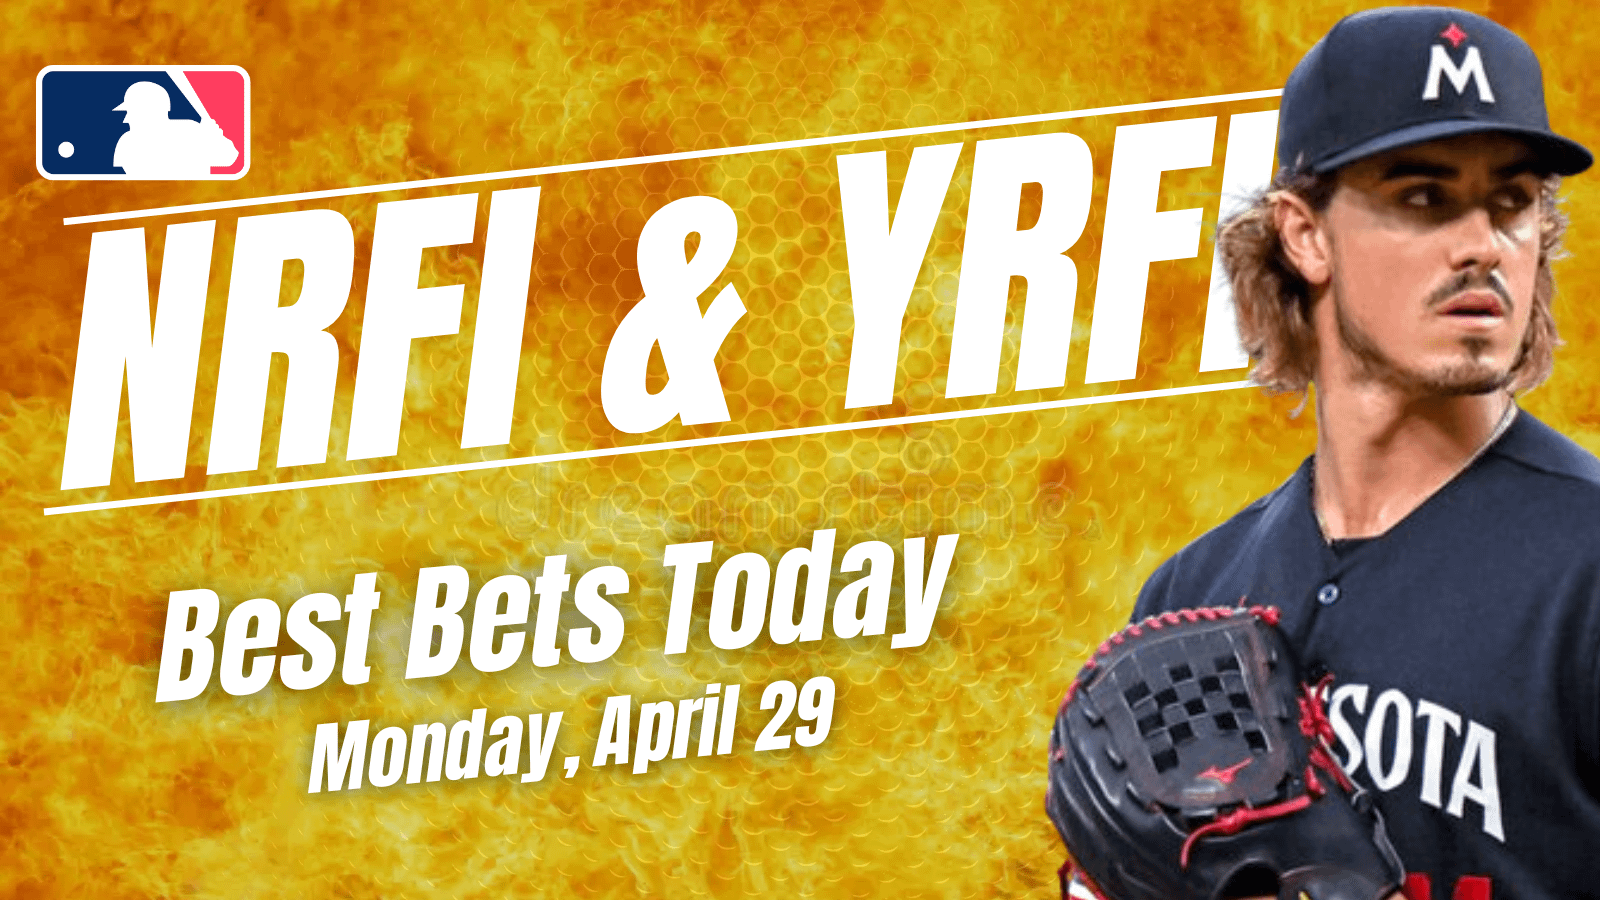 Looking for the top NRFI & YRFI bets today? We dive into the best first inning bets for Monday, April 29, including...